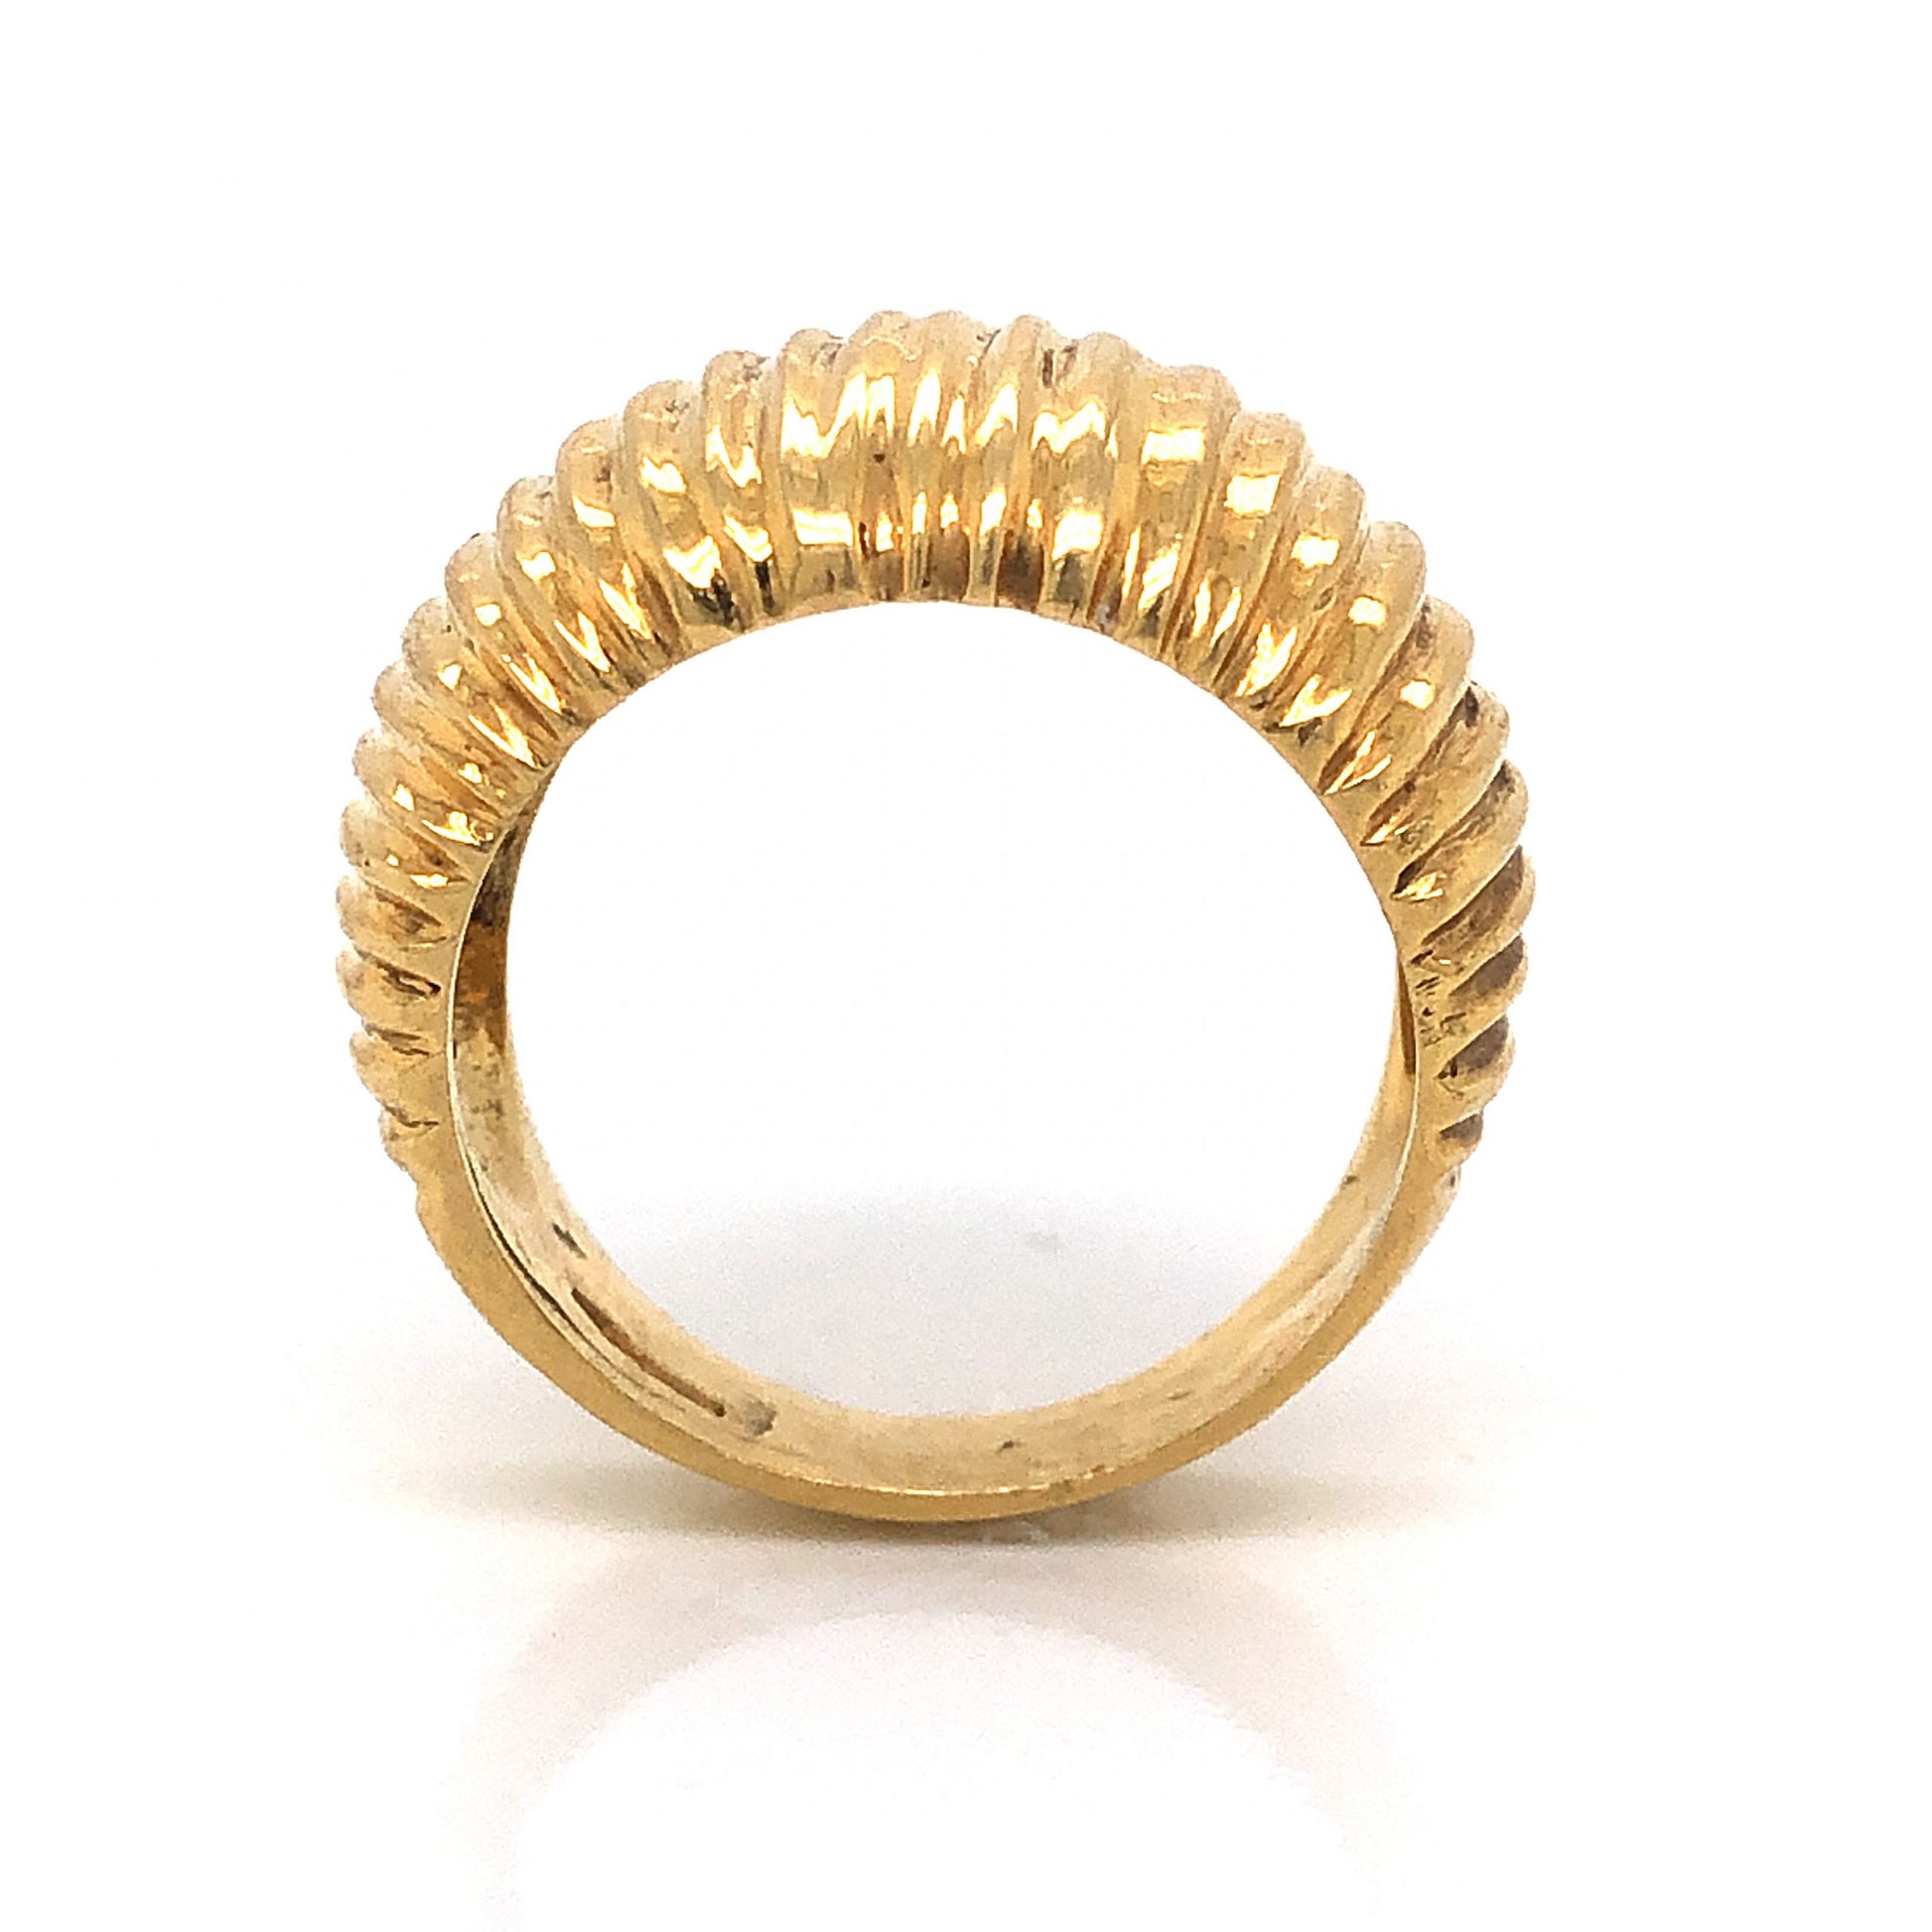 Textured Statement Ring in 18k Yellow GoldComposition: 18 Karat Yellow Gold Ring Size: 7 Total Gram Weight: 8.0 g Inscription: 750 1183
      